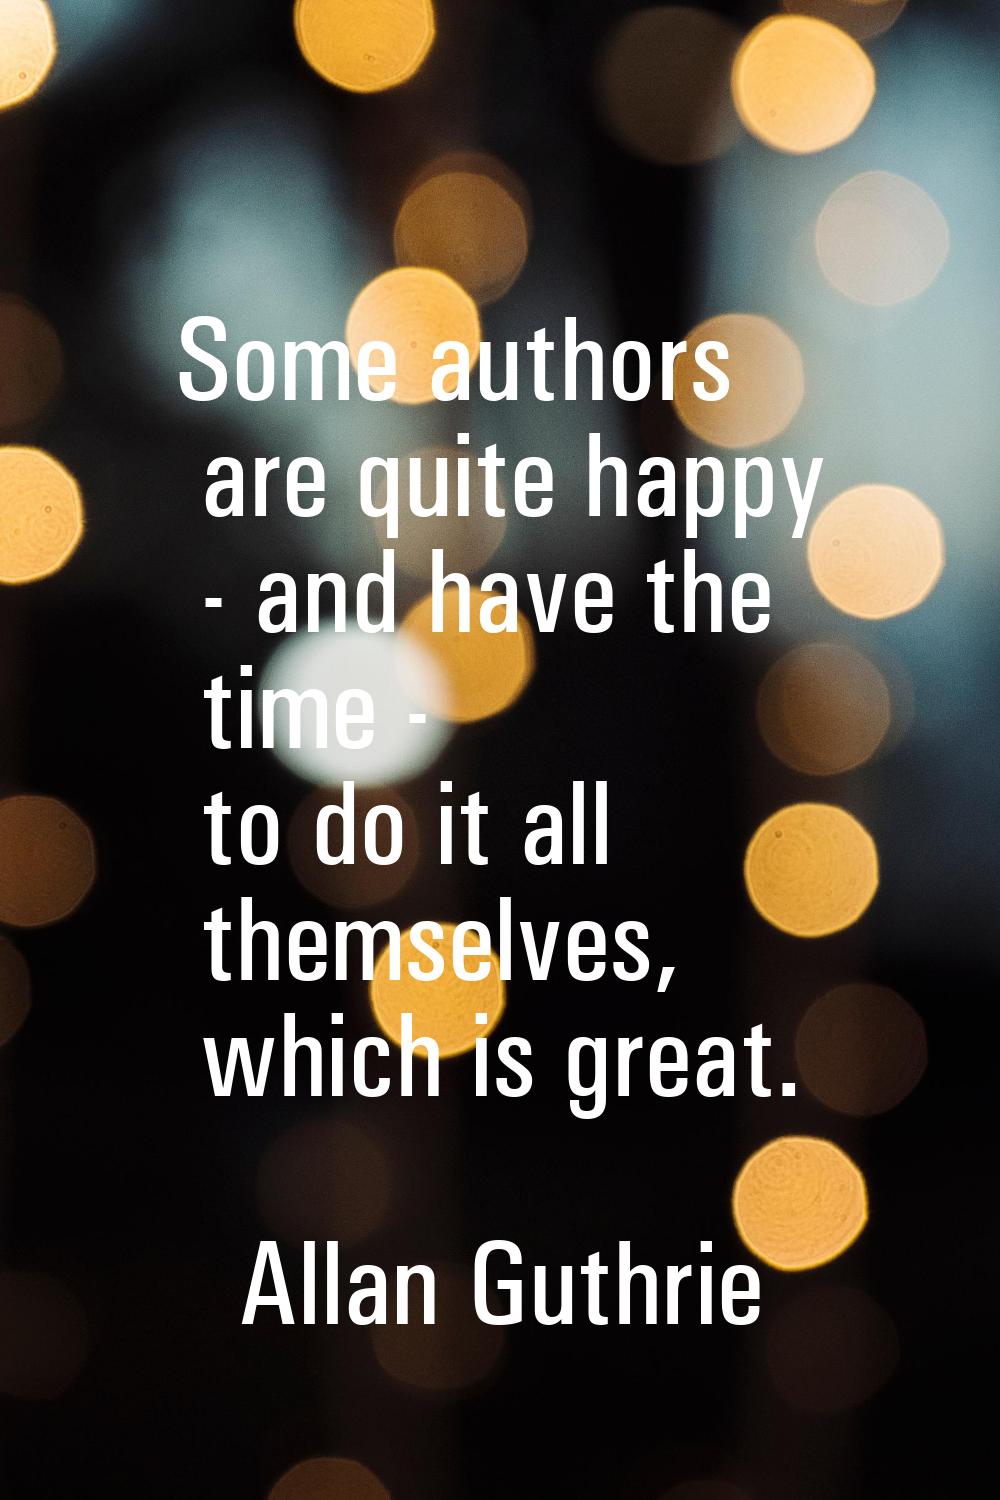 Some authors are quite happy - and have the time - to do it all themselves, which is great.